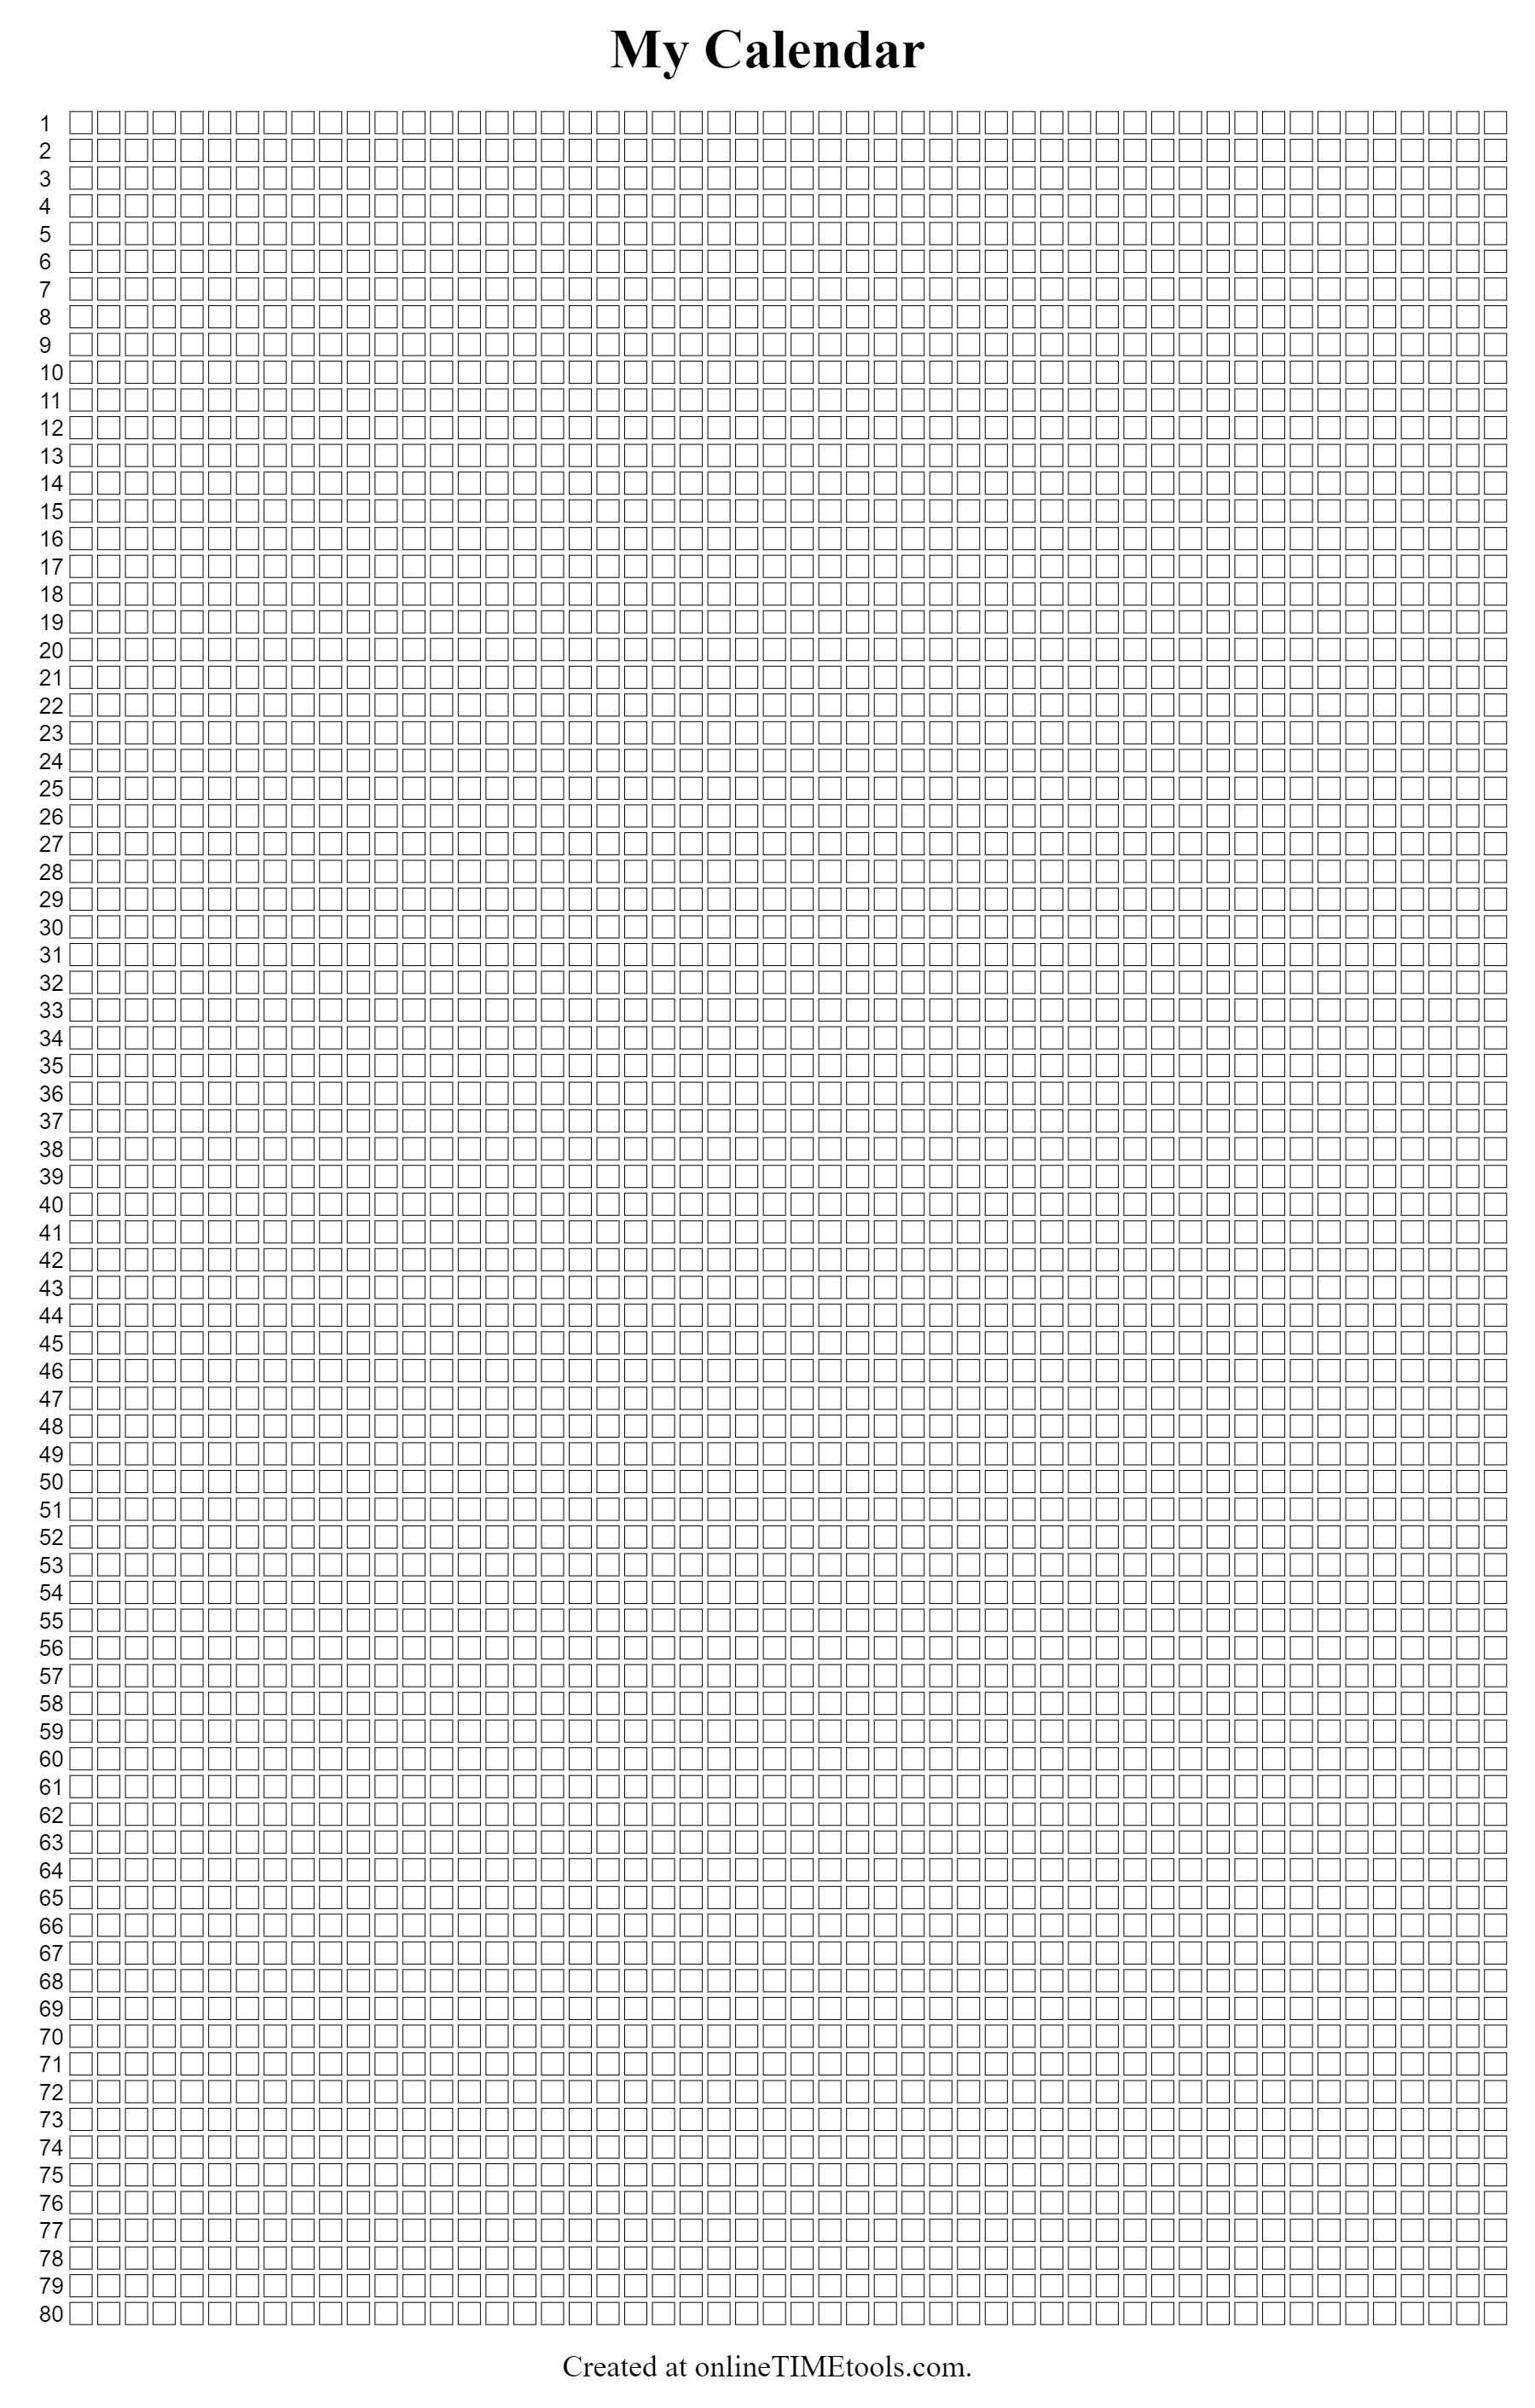 In this example, we create an empty Memento Mori Life calendar. The calendar is designed for 80 years and contains 52 weeks of the year on each line. The calendar uses the black color for cells and text and the background is white. It also has a title and a vertical age scale. You can download this calendar, print it as a PDF, and fill the cells every week.